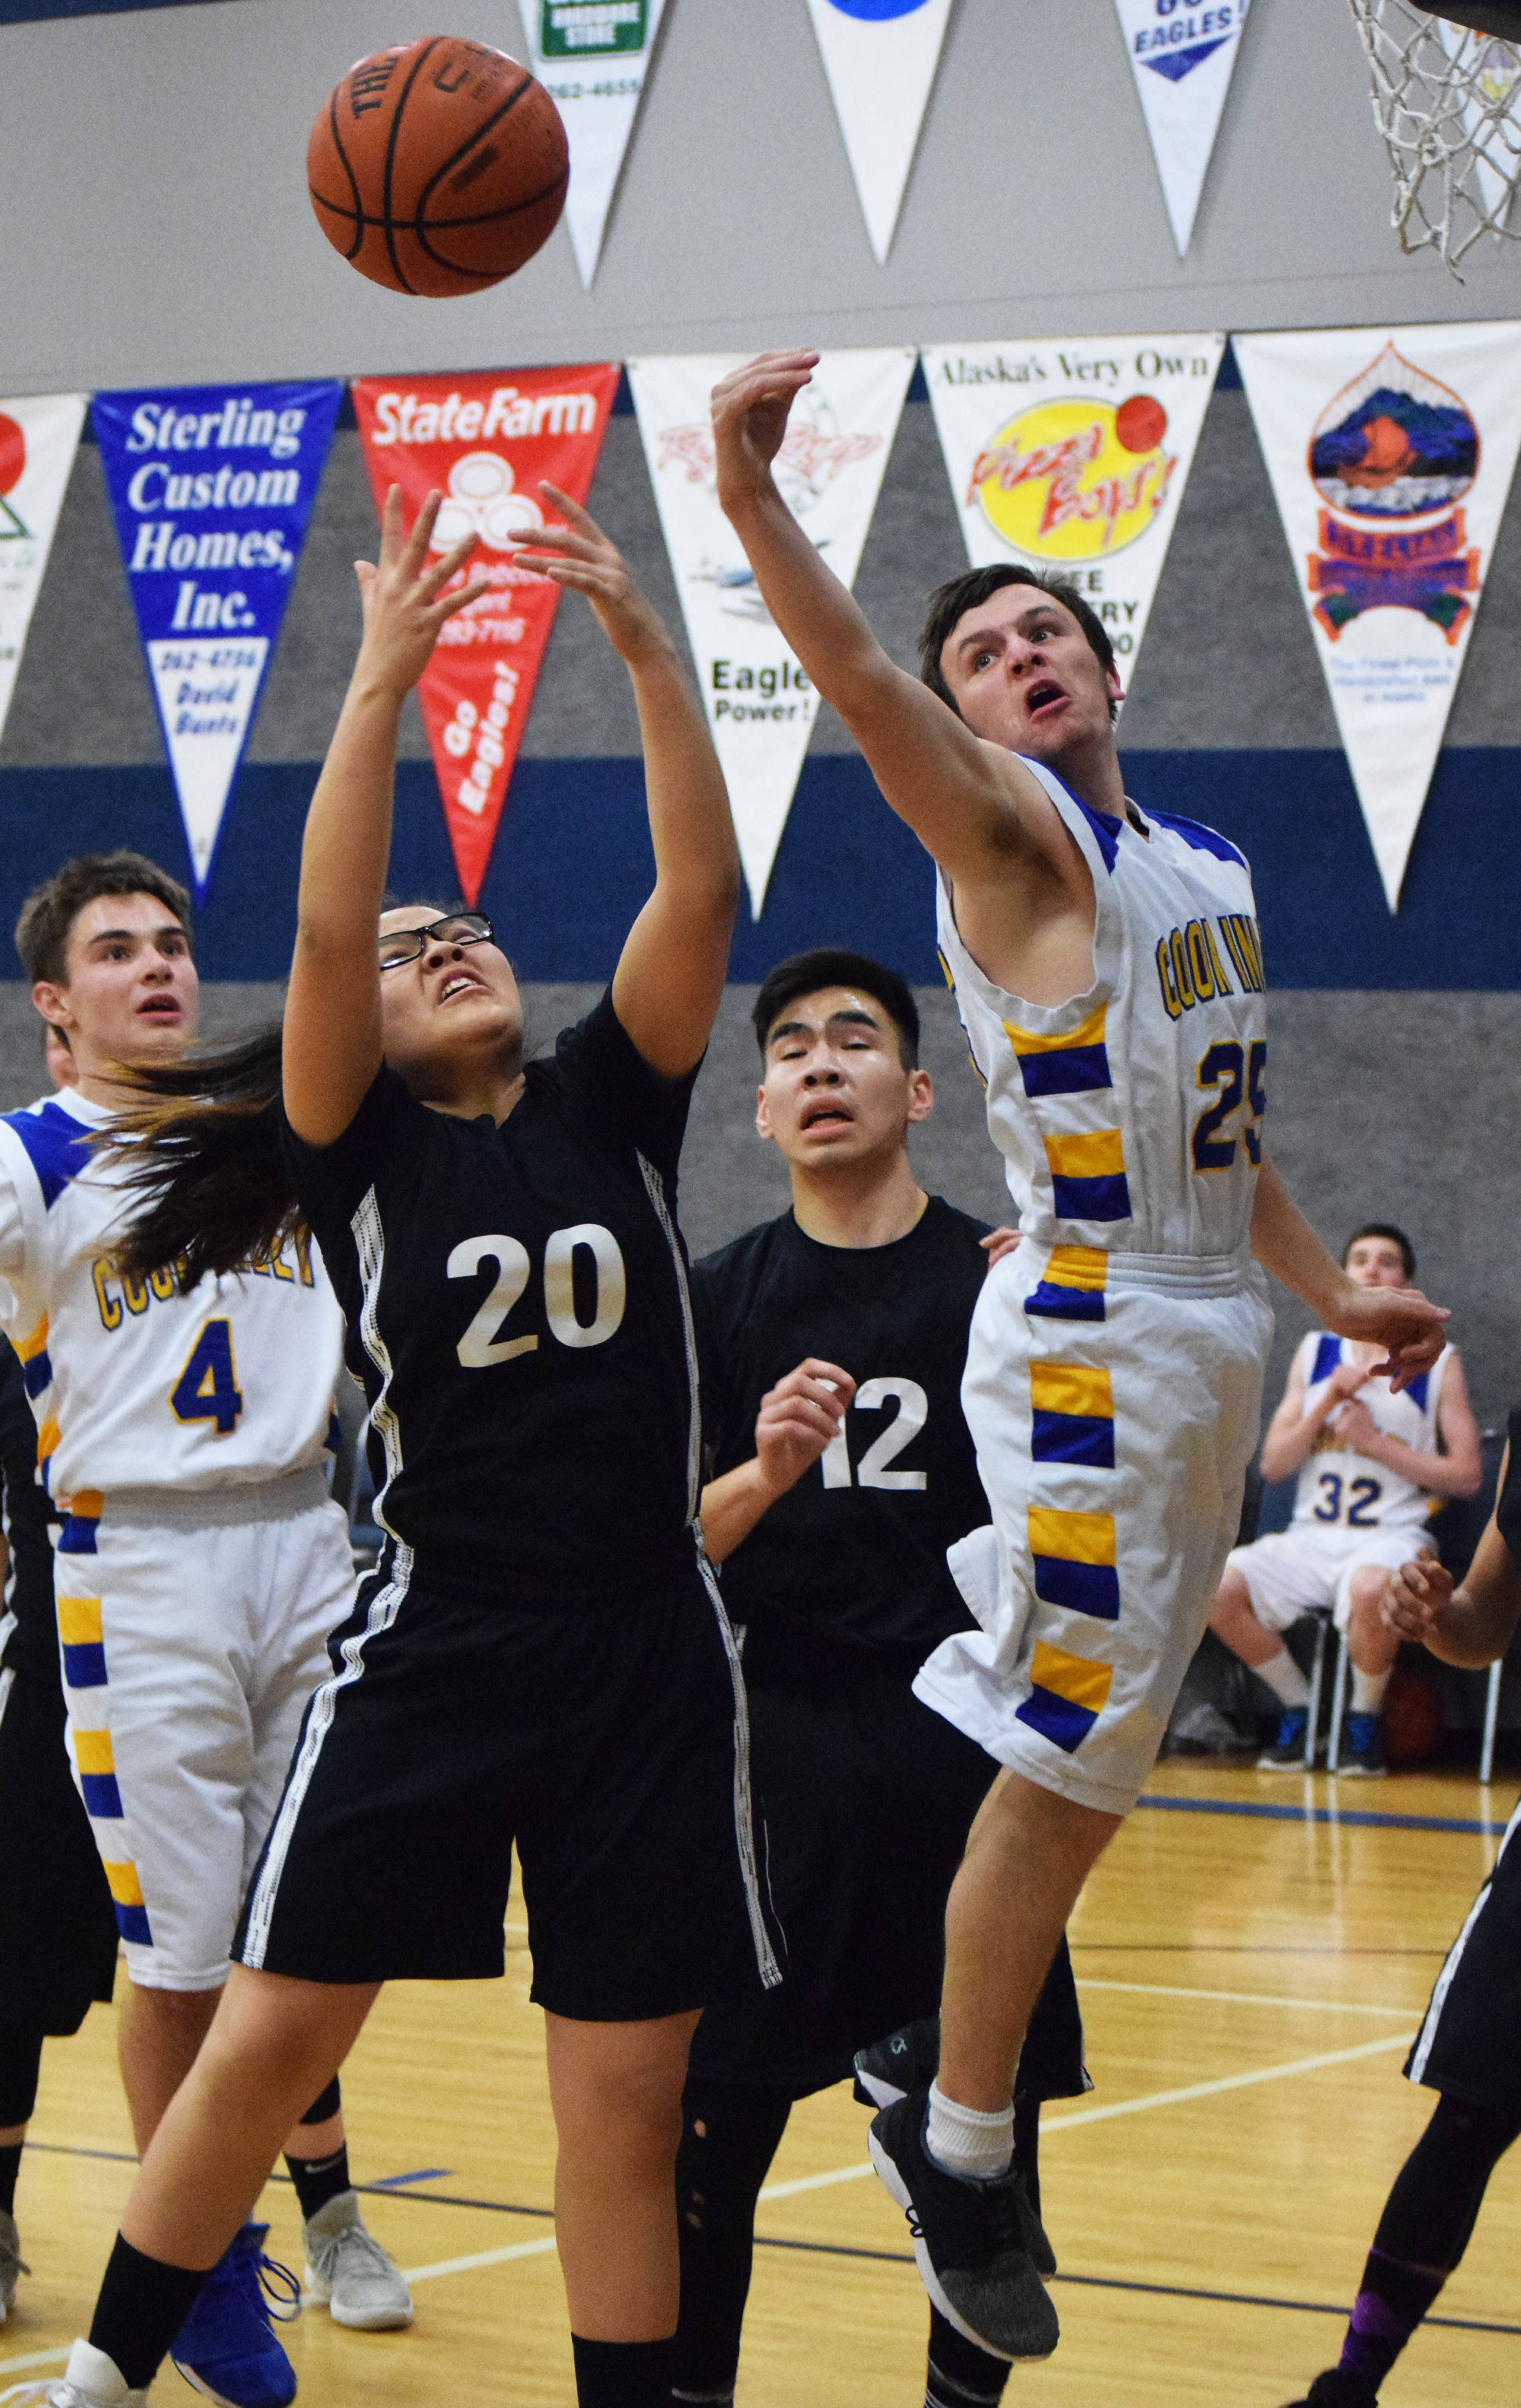 Cook Inlet’s James Anderson contends with Kodiak ESS’s Teanna Amodo (20) for a rebound Thursday night at Cook Inlet Academy in Soldotna. (Photo by Joey Klecka/Peninsula Clarion)